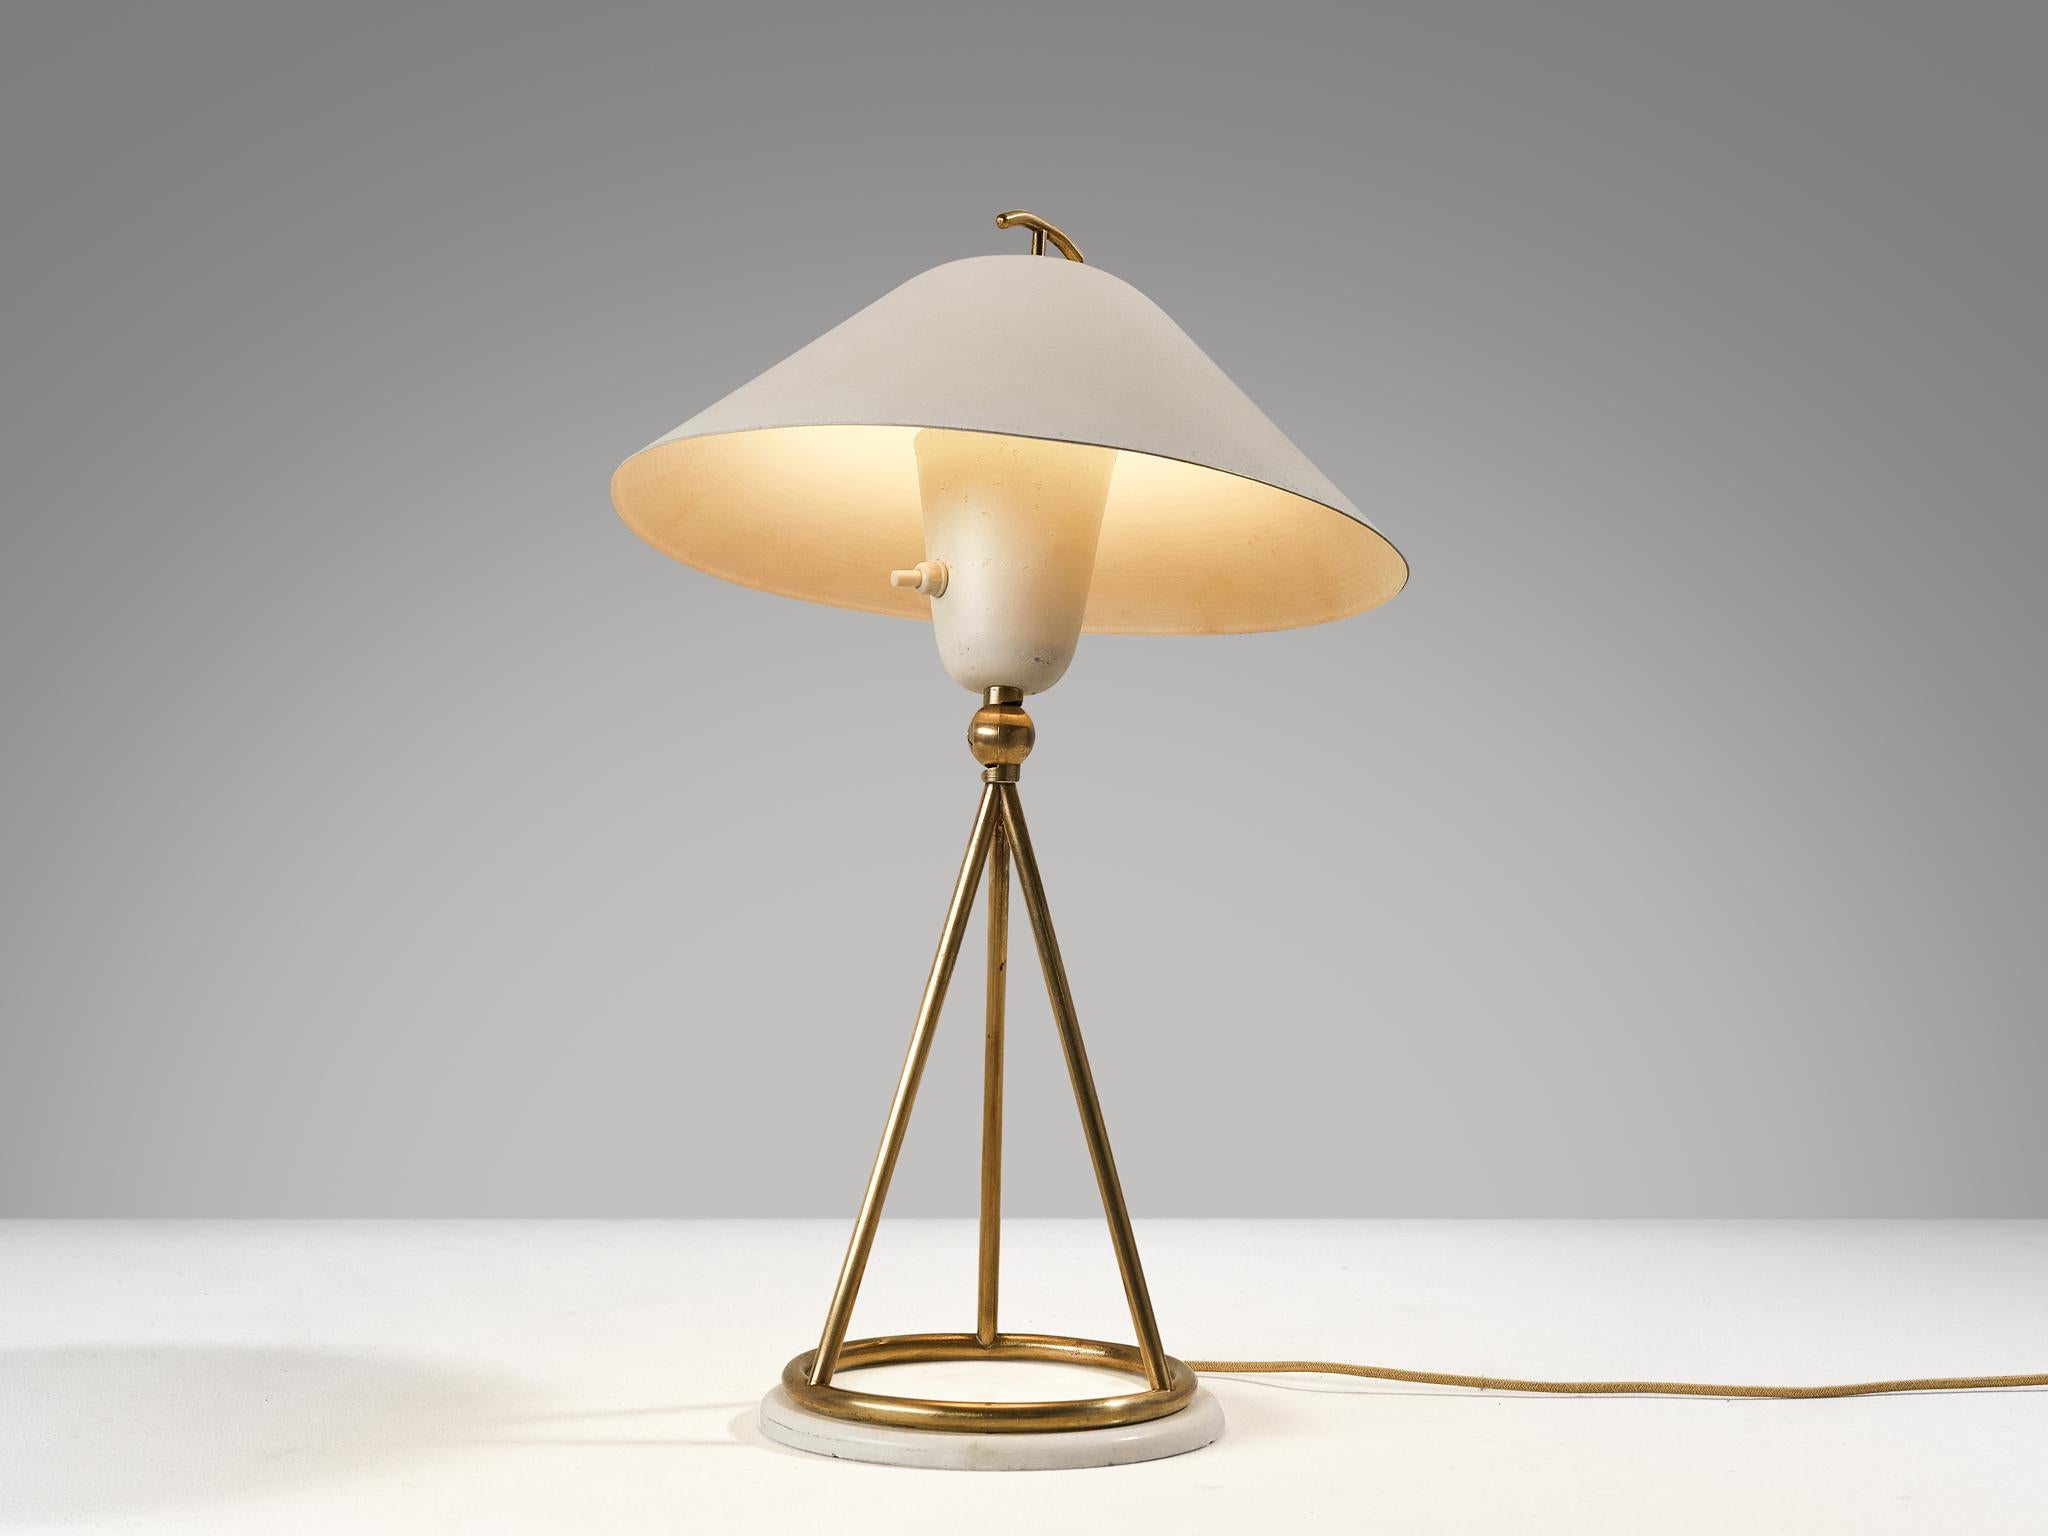 Gino Sarfatti for Arteluce, table lamp, model ‘516’, brass, marble, enameled aluminum, Italy, 1948

This desk lamp, model 516, is designed by the influential designer in the field of lighting design Gino Sarfatti (1912-1985) for Arteluce in 1948.